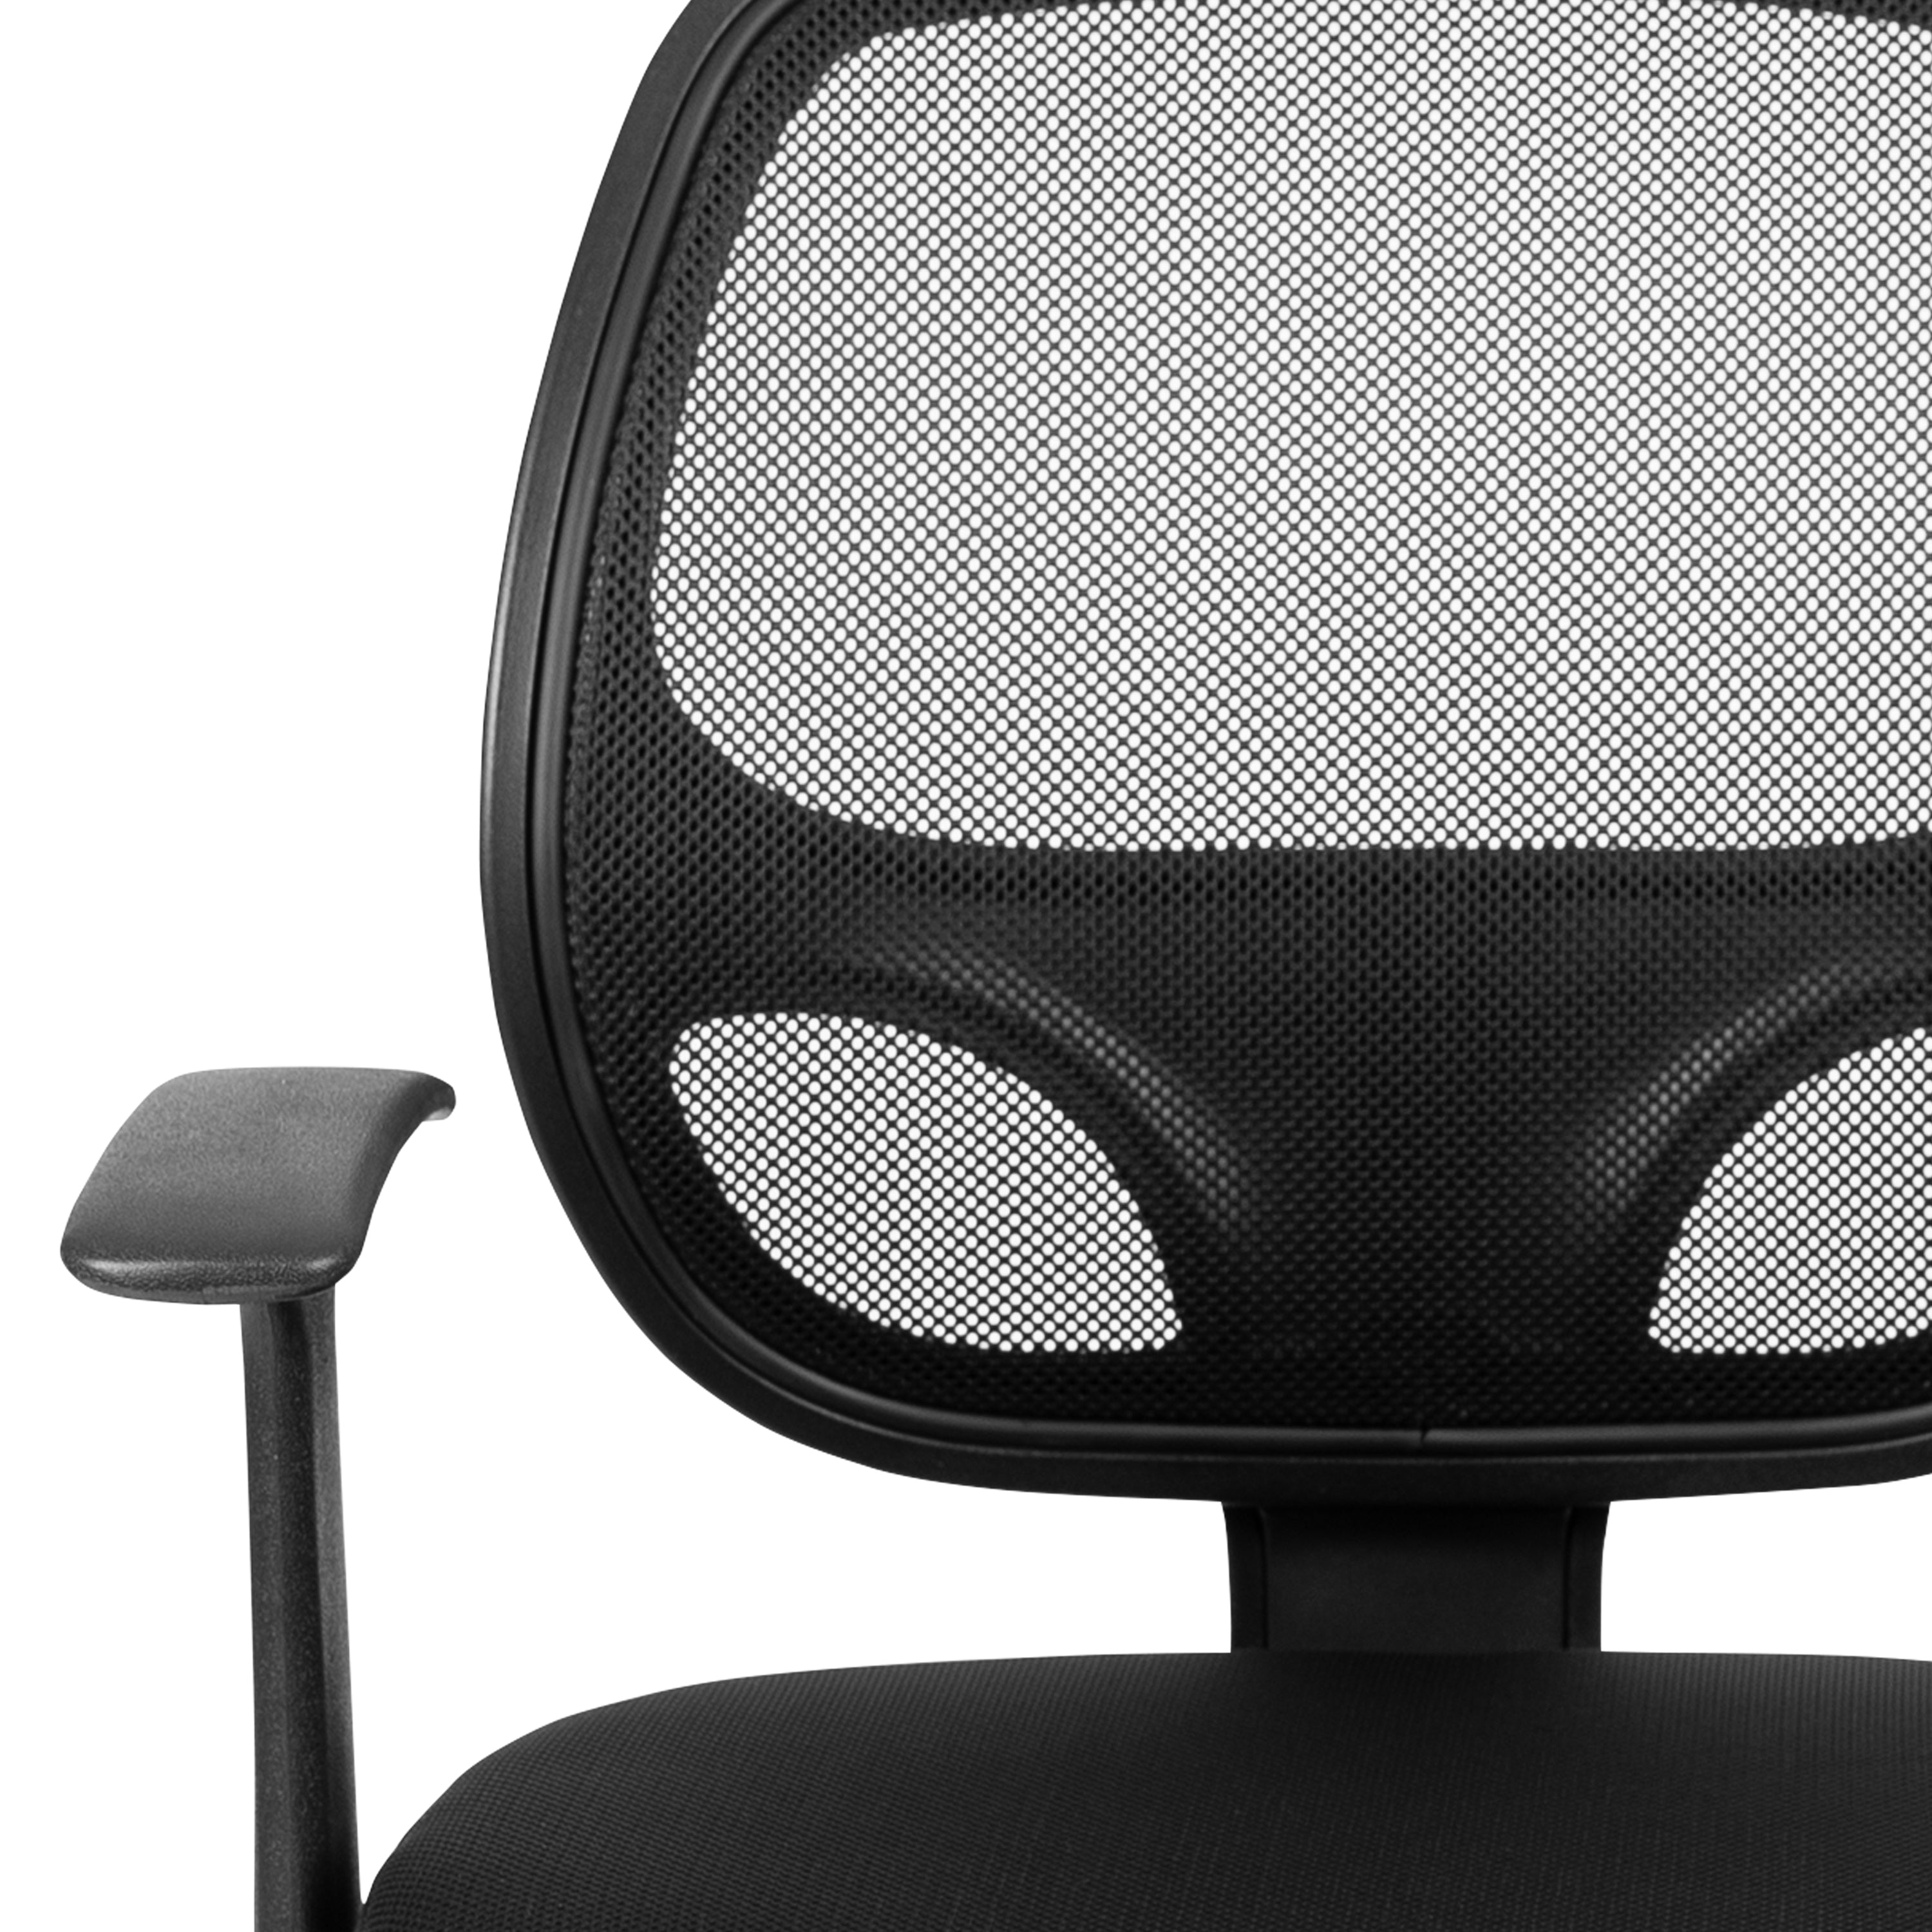 Flash Fundamentals Mid-Back Mesh Swivel Ergonomic Task Office Chair with Arms-Mesh Task Office Chair-Flash Furniture-Wall2Wall Furnishings